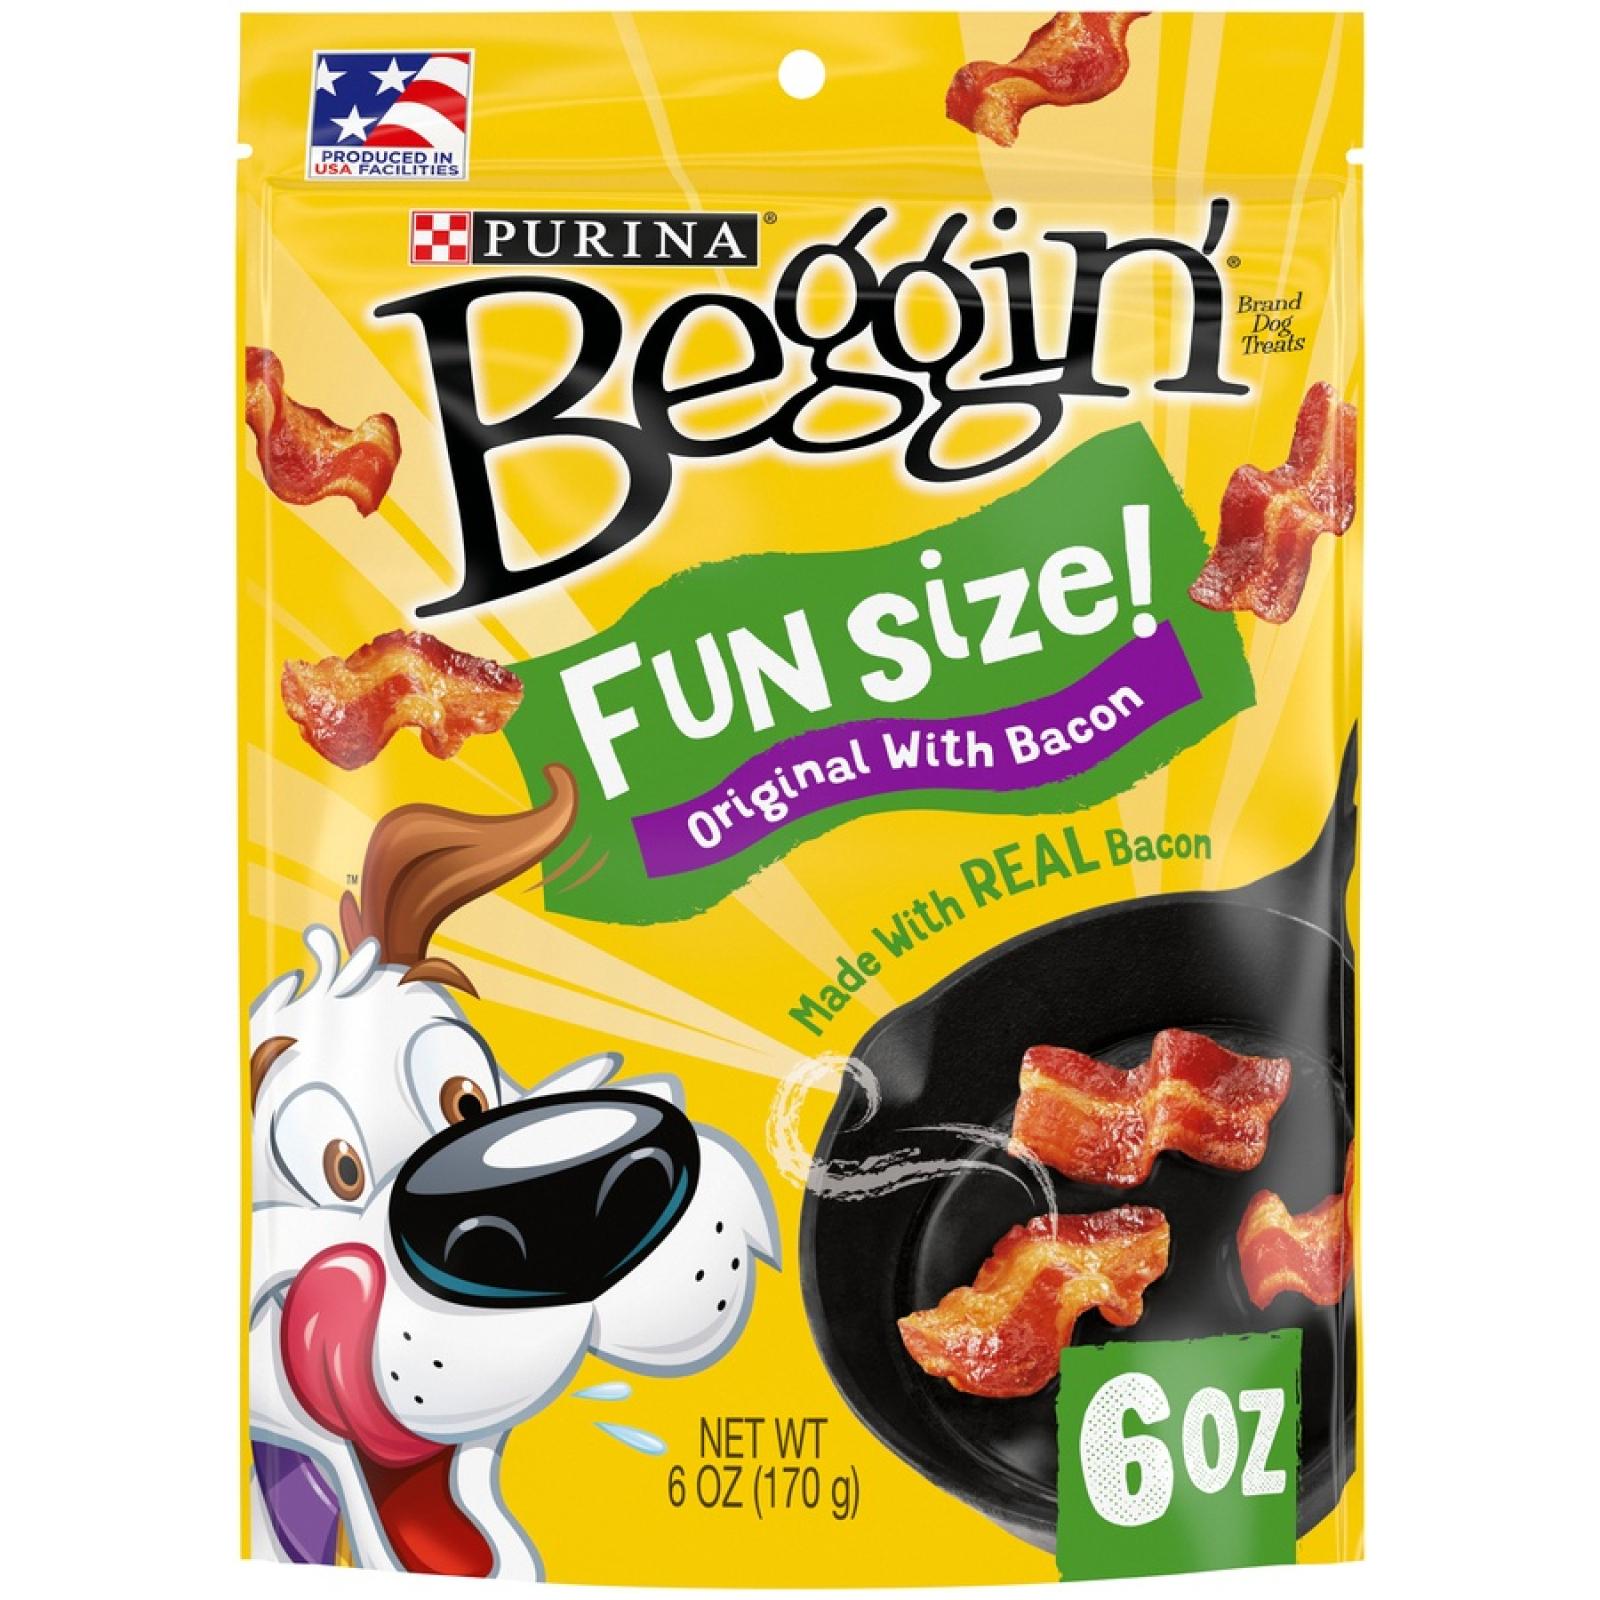 Purina Beggin' Real Meat Dog Treats, Fun Size Original With Bacon